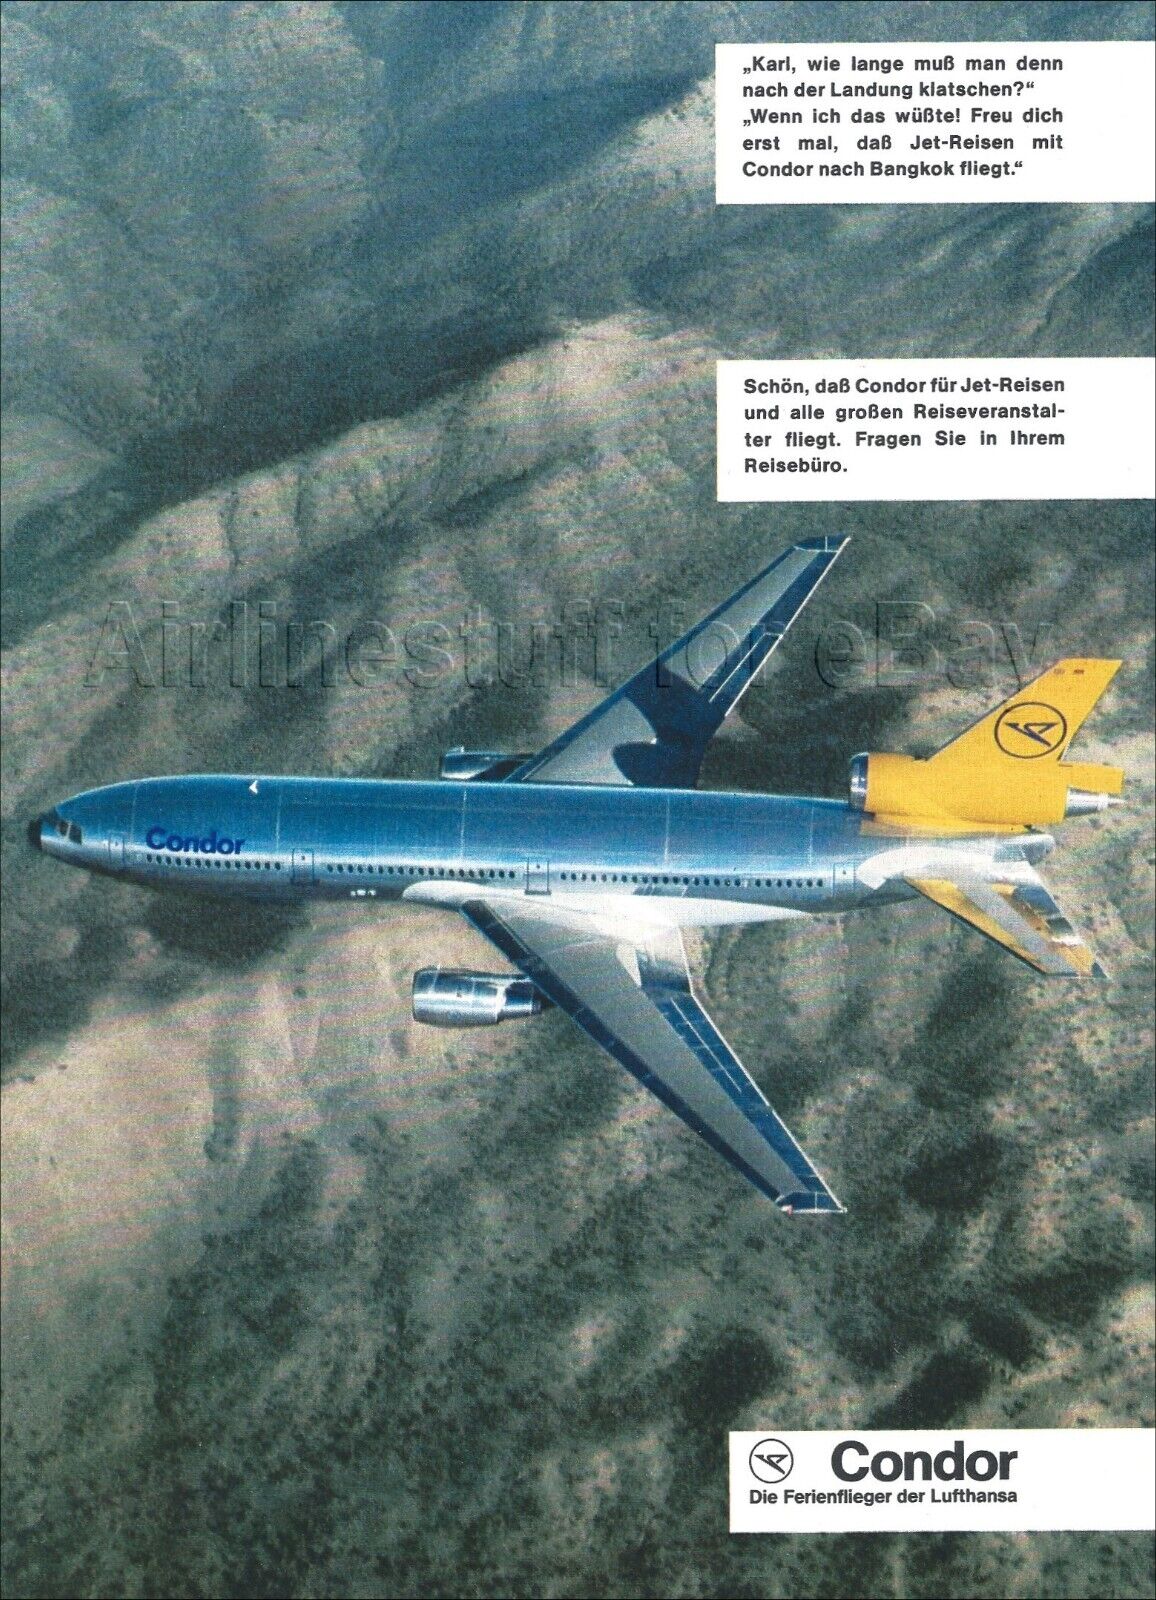 1982 CONDOR Airlines McDonnell Douglas DC-10 ad airways advert Germany LUFTHANSA